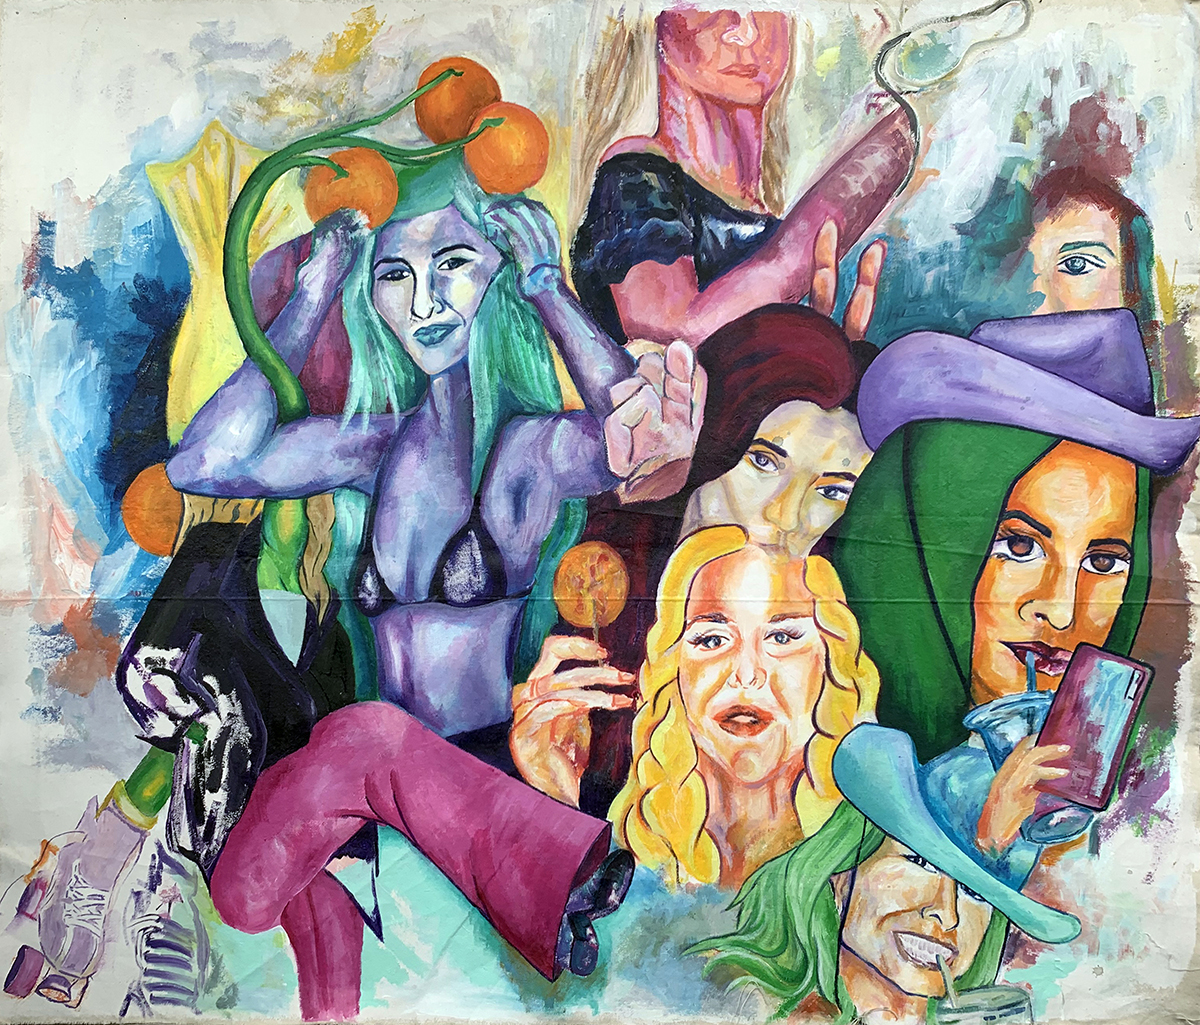 Party, acrylic on canvas painting by Mia Boulukos.